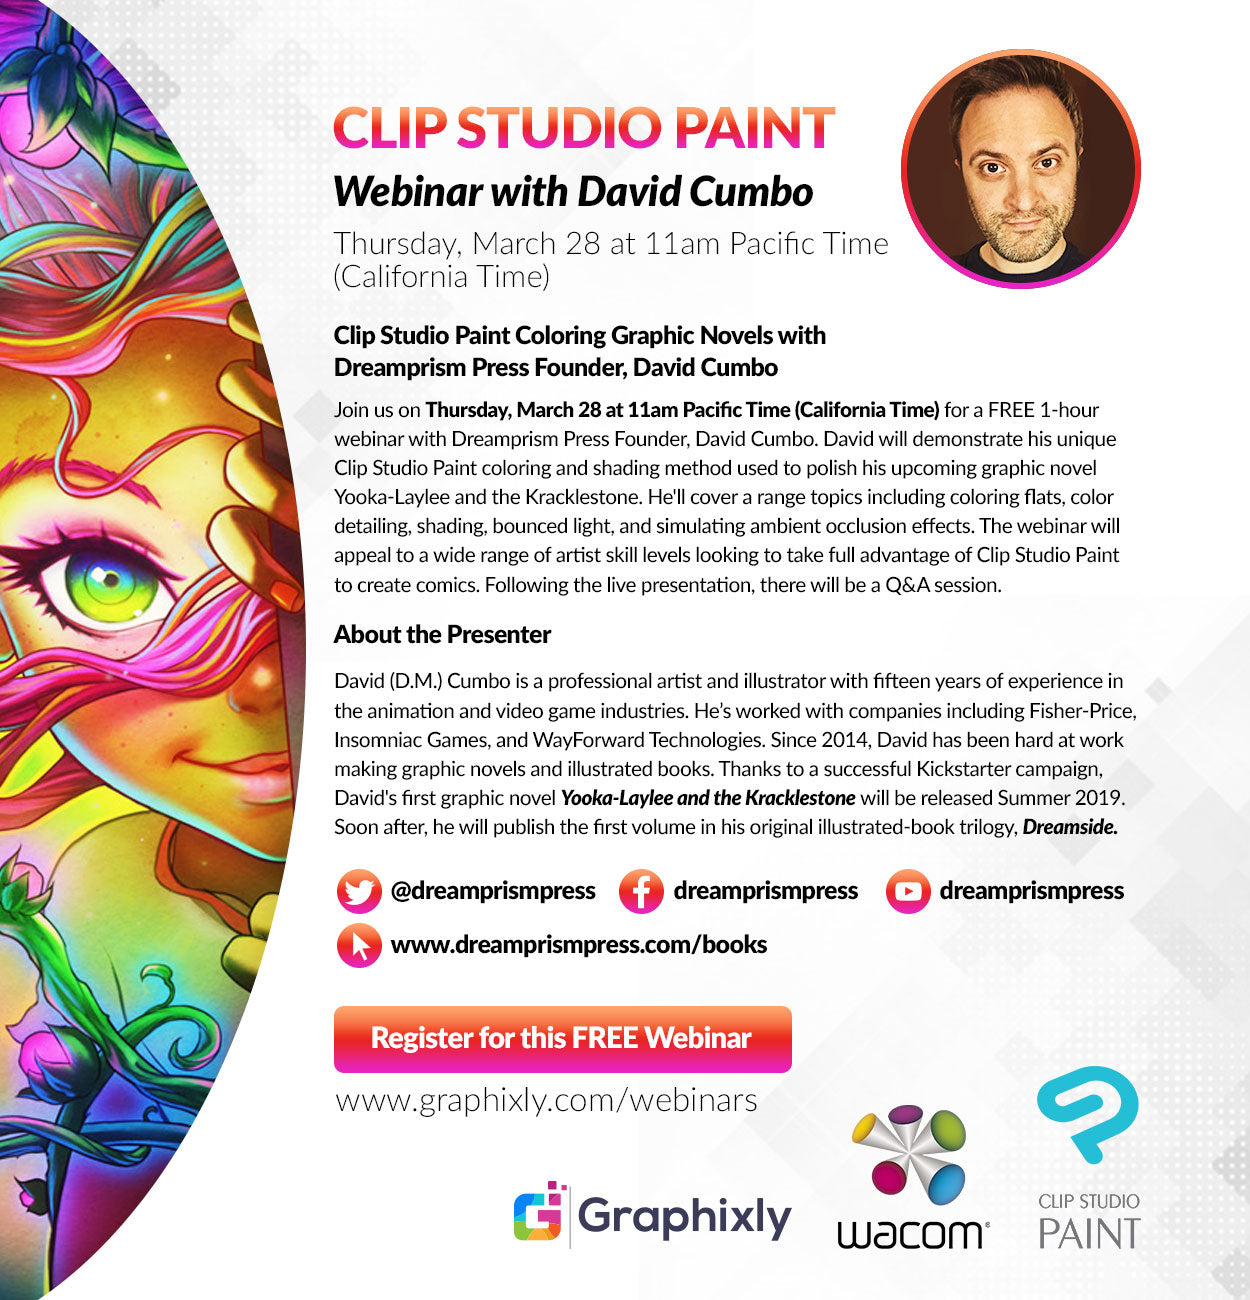 Webinar – Clip Studio Paint Coloring Graphic Novels with Dreamprism Press Founder, David Cumbo